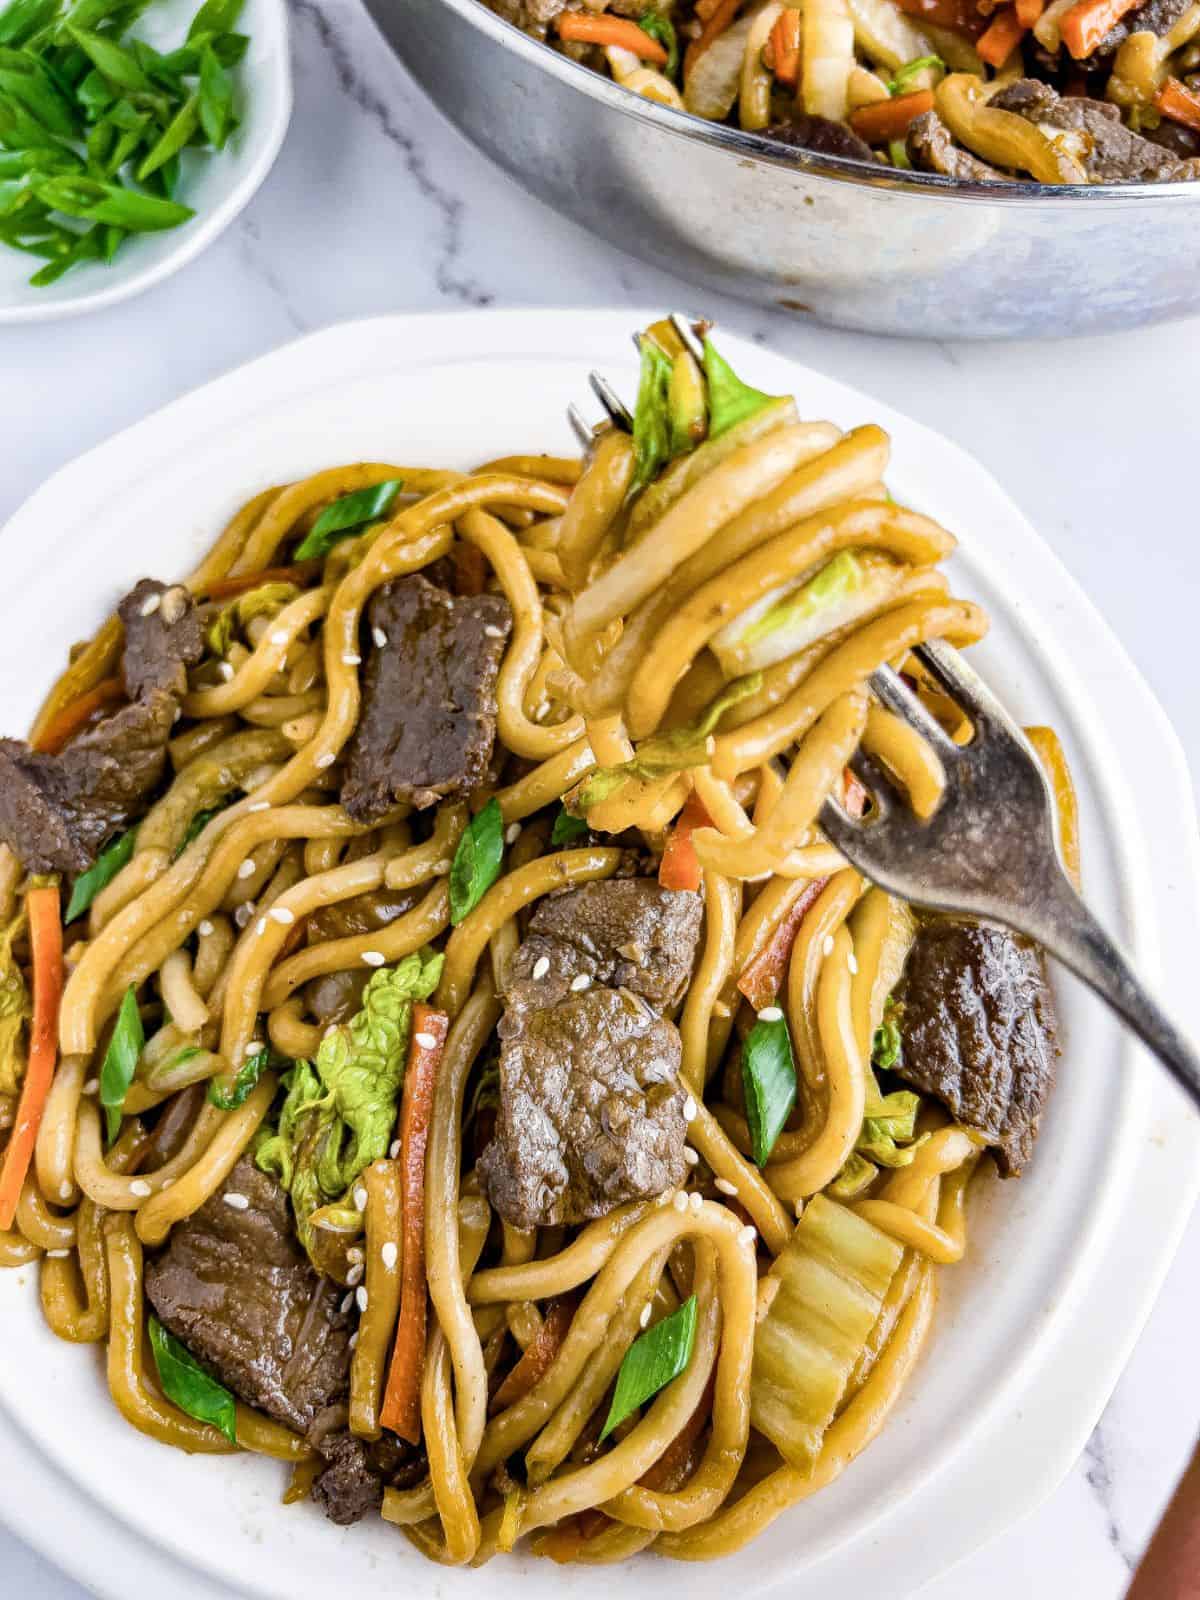 Beef udon stir-fry noodles in a plate.